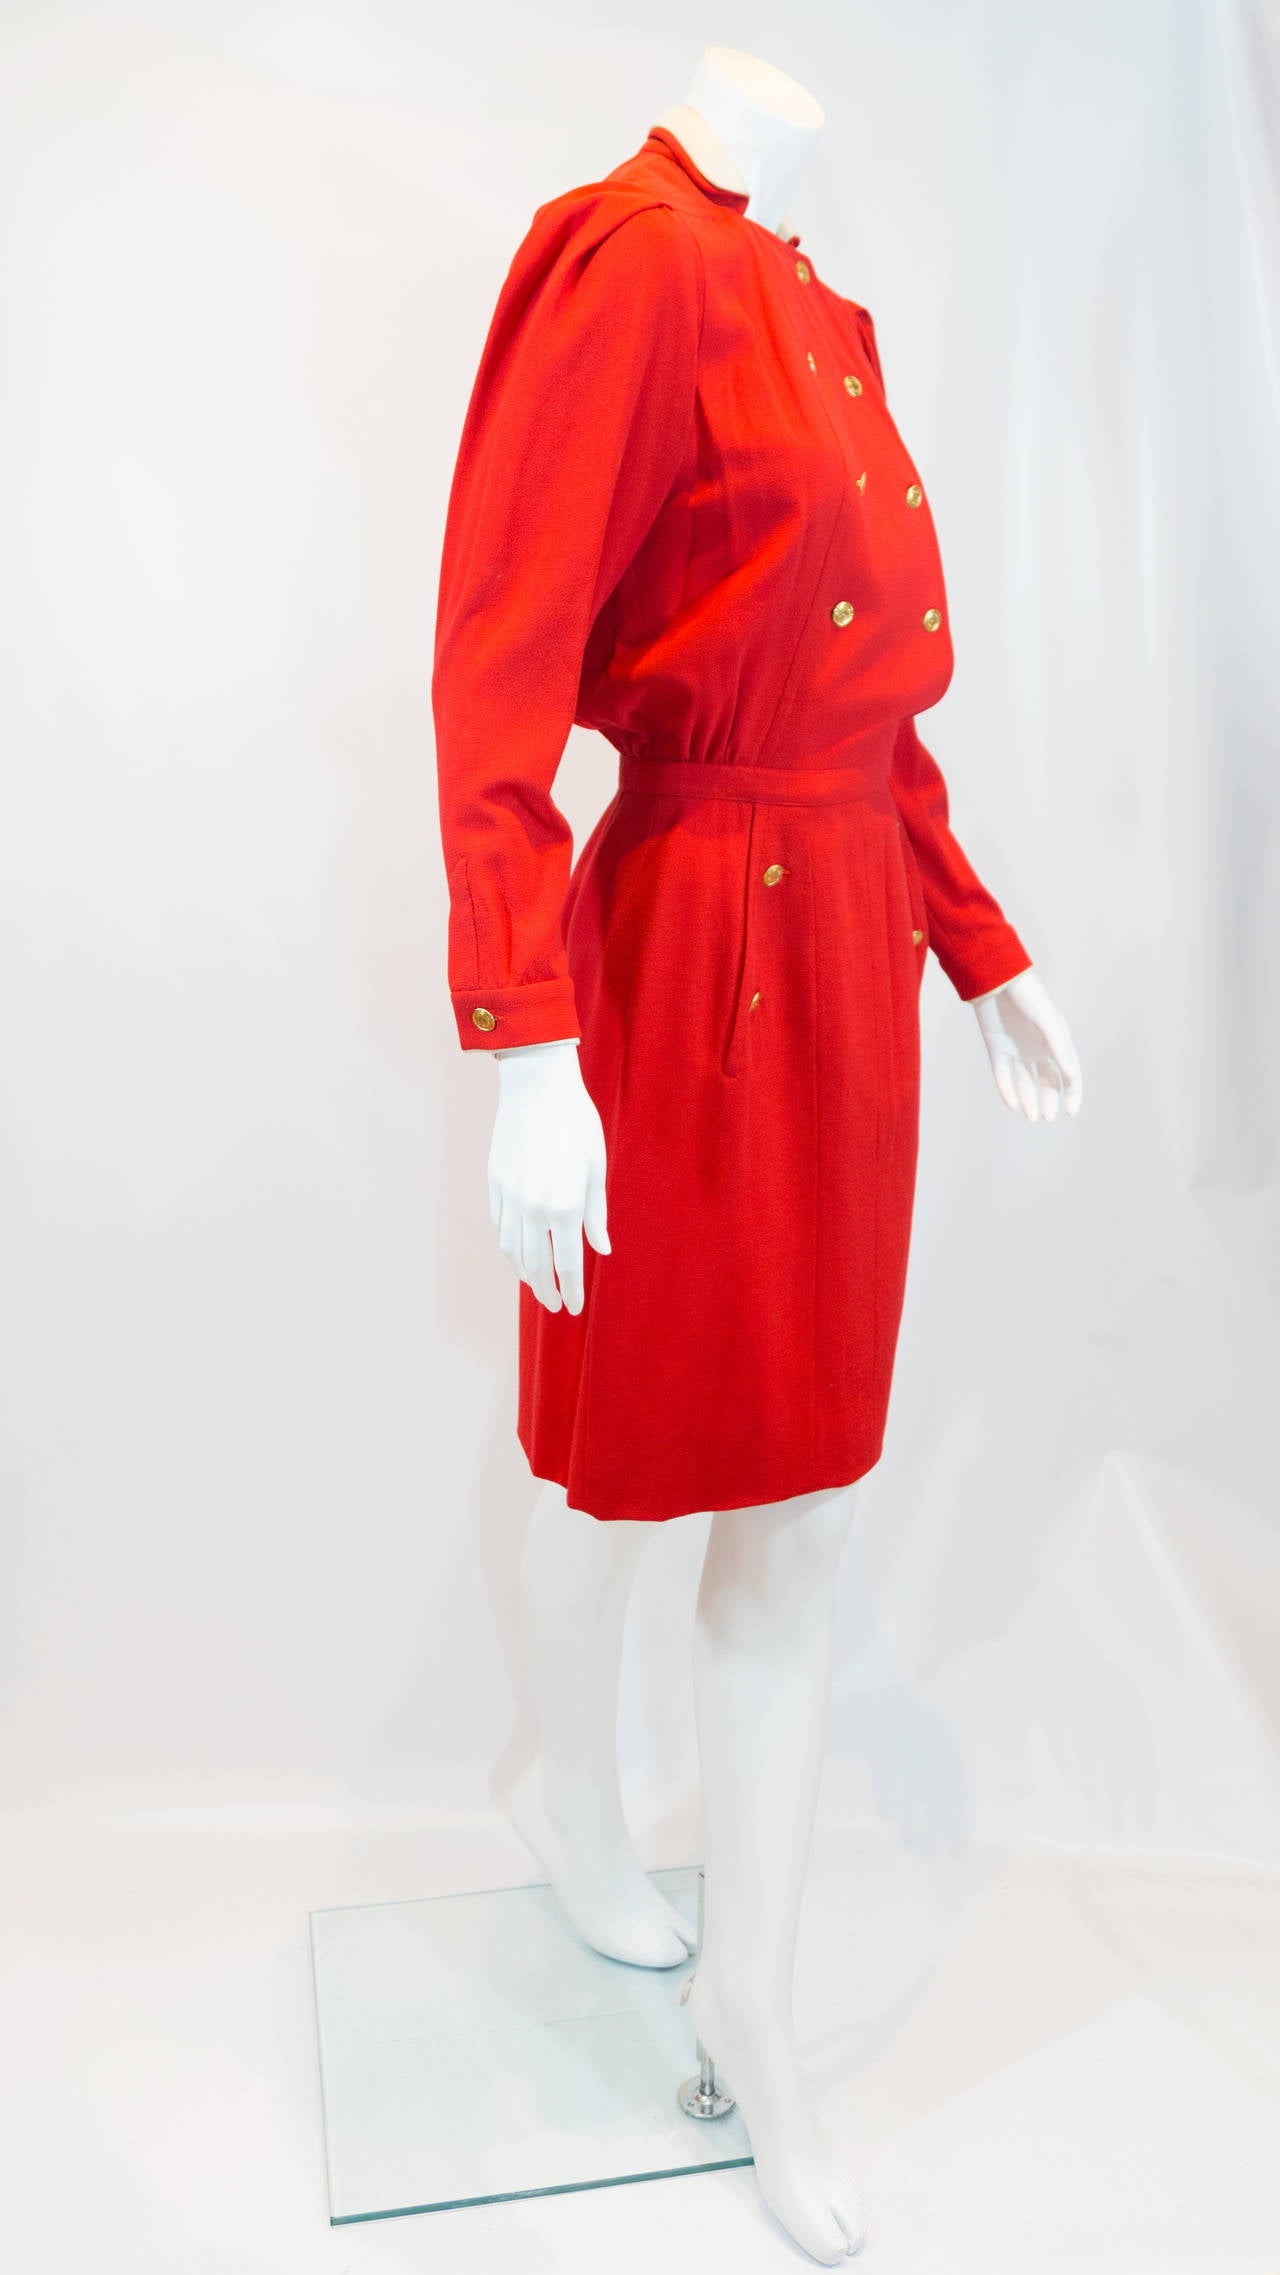 Chanel vintage red dress that is double breasted and has 7 front buttons, button detail on sleeve, and the skirt section has 2 side slit pockets with 2 button detail on each. Collar is lined in white silk.